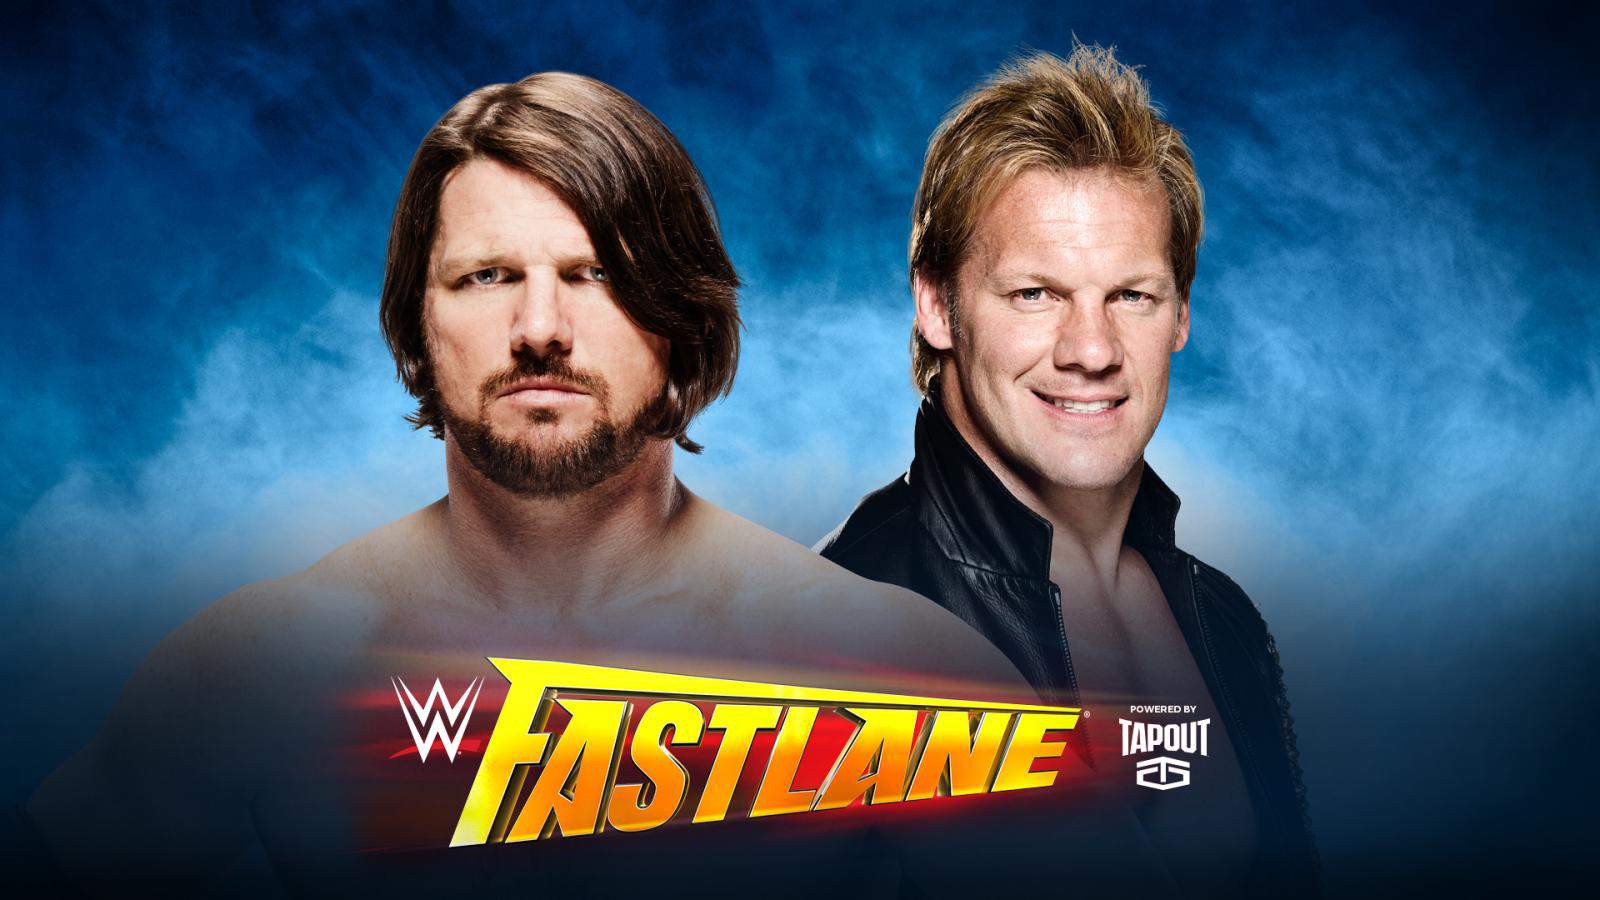 Wwe Fastlane The Results Highlights You Need To Know